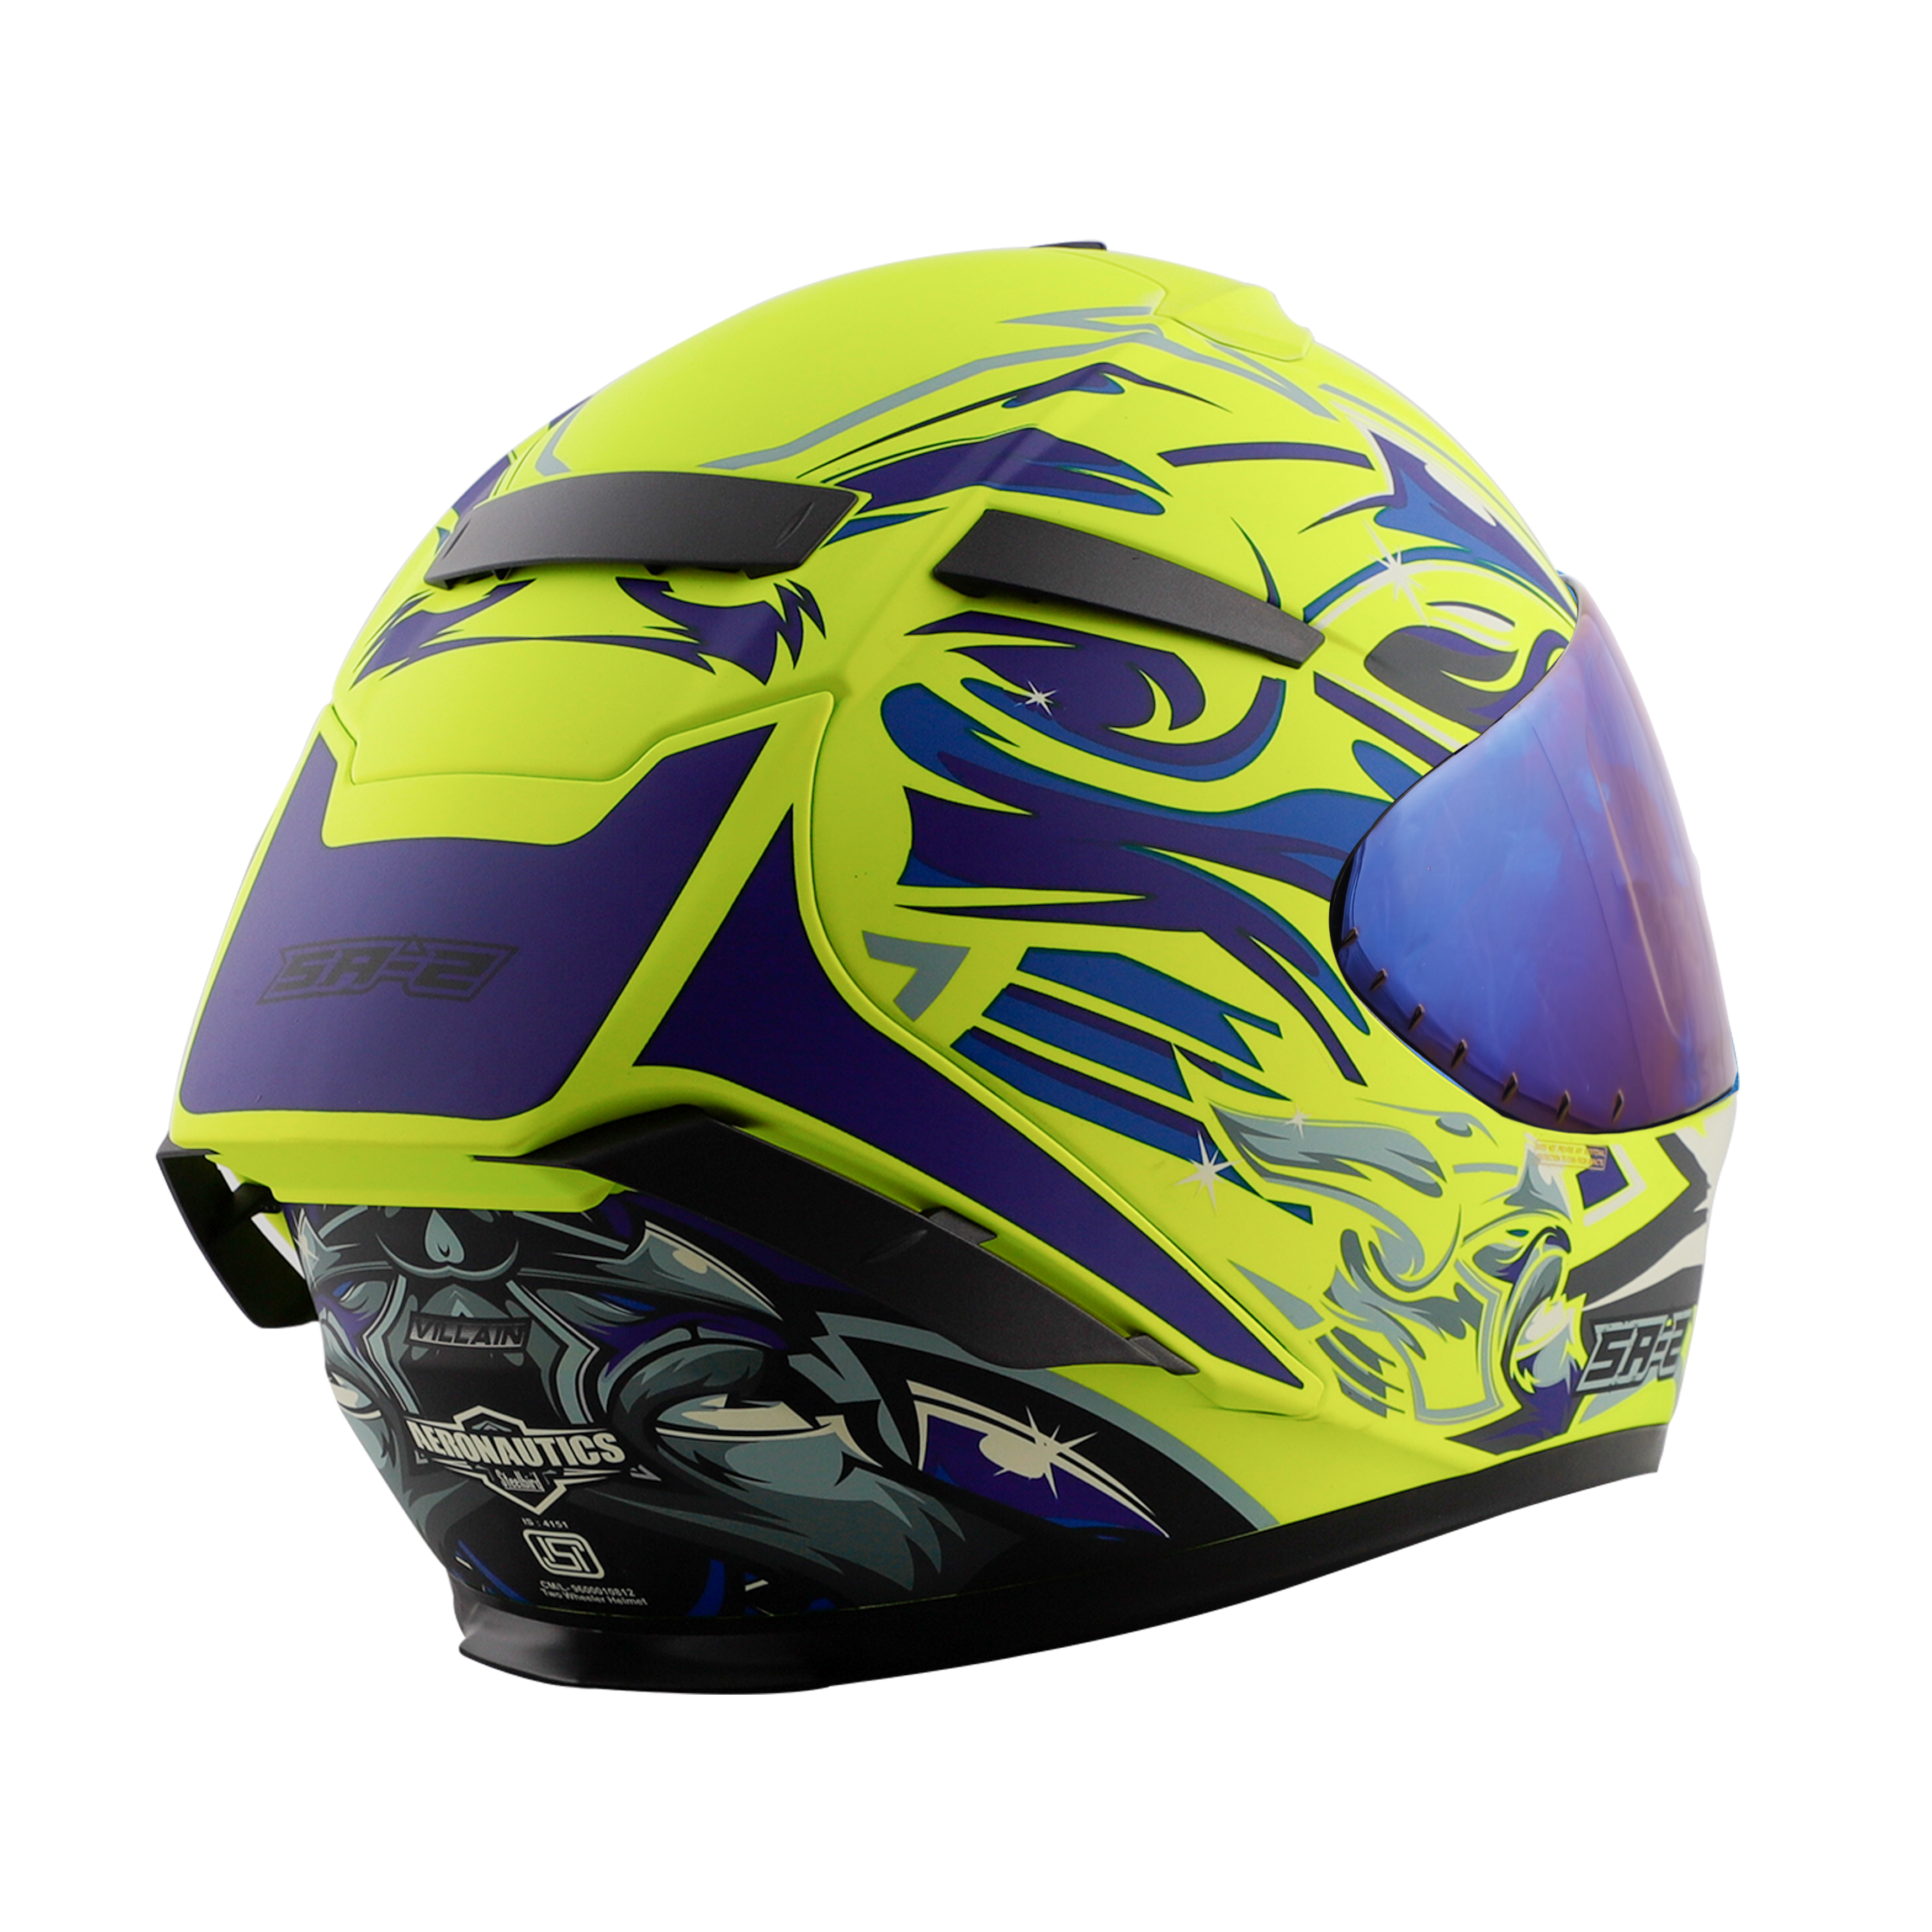 SA-2 VILLAIN GLOSSY FLUO NEON WITH BLUE (FITTED WITH CLEAR VISOR EXTRA BLUE CHROME VISOR FREE)